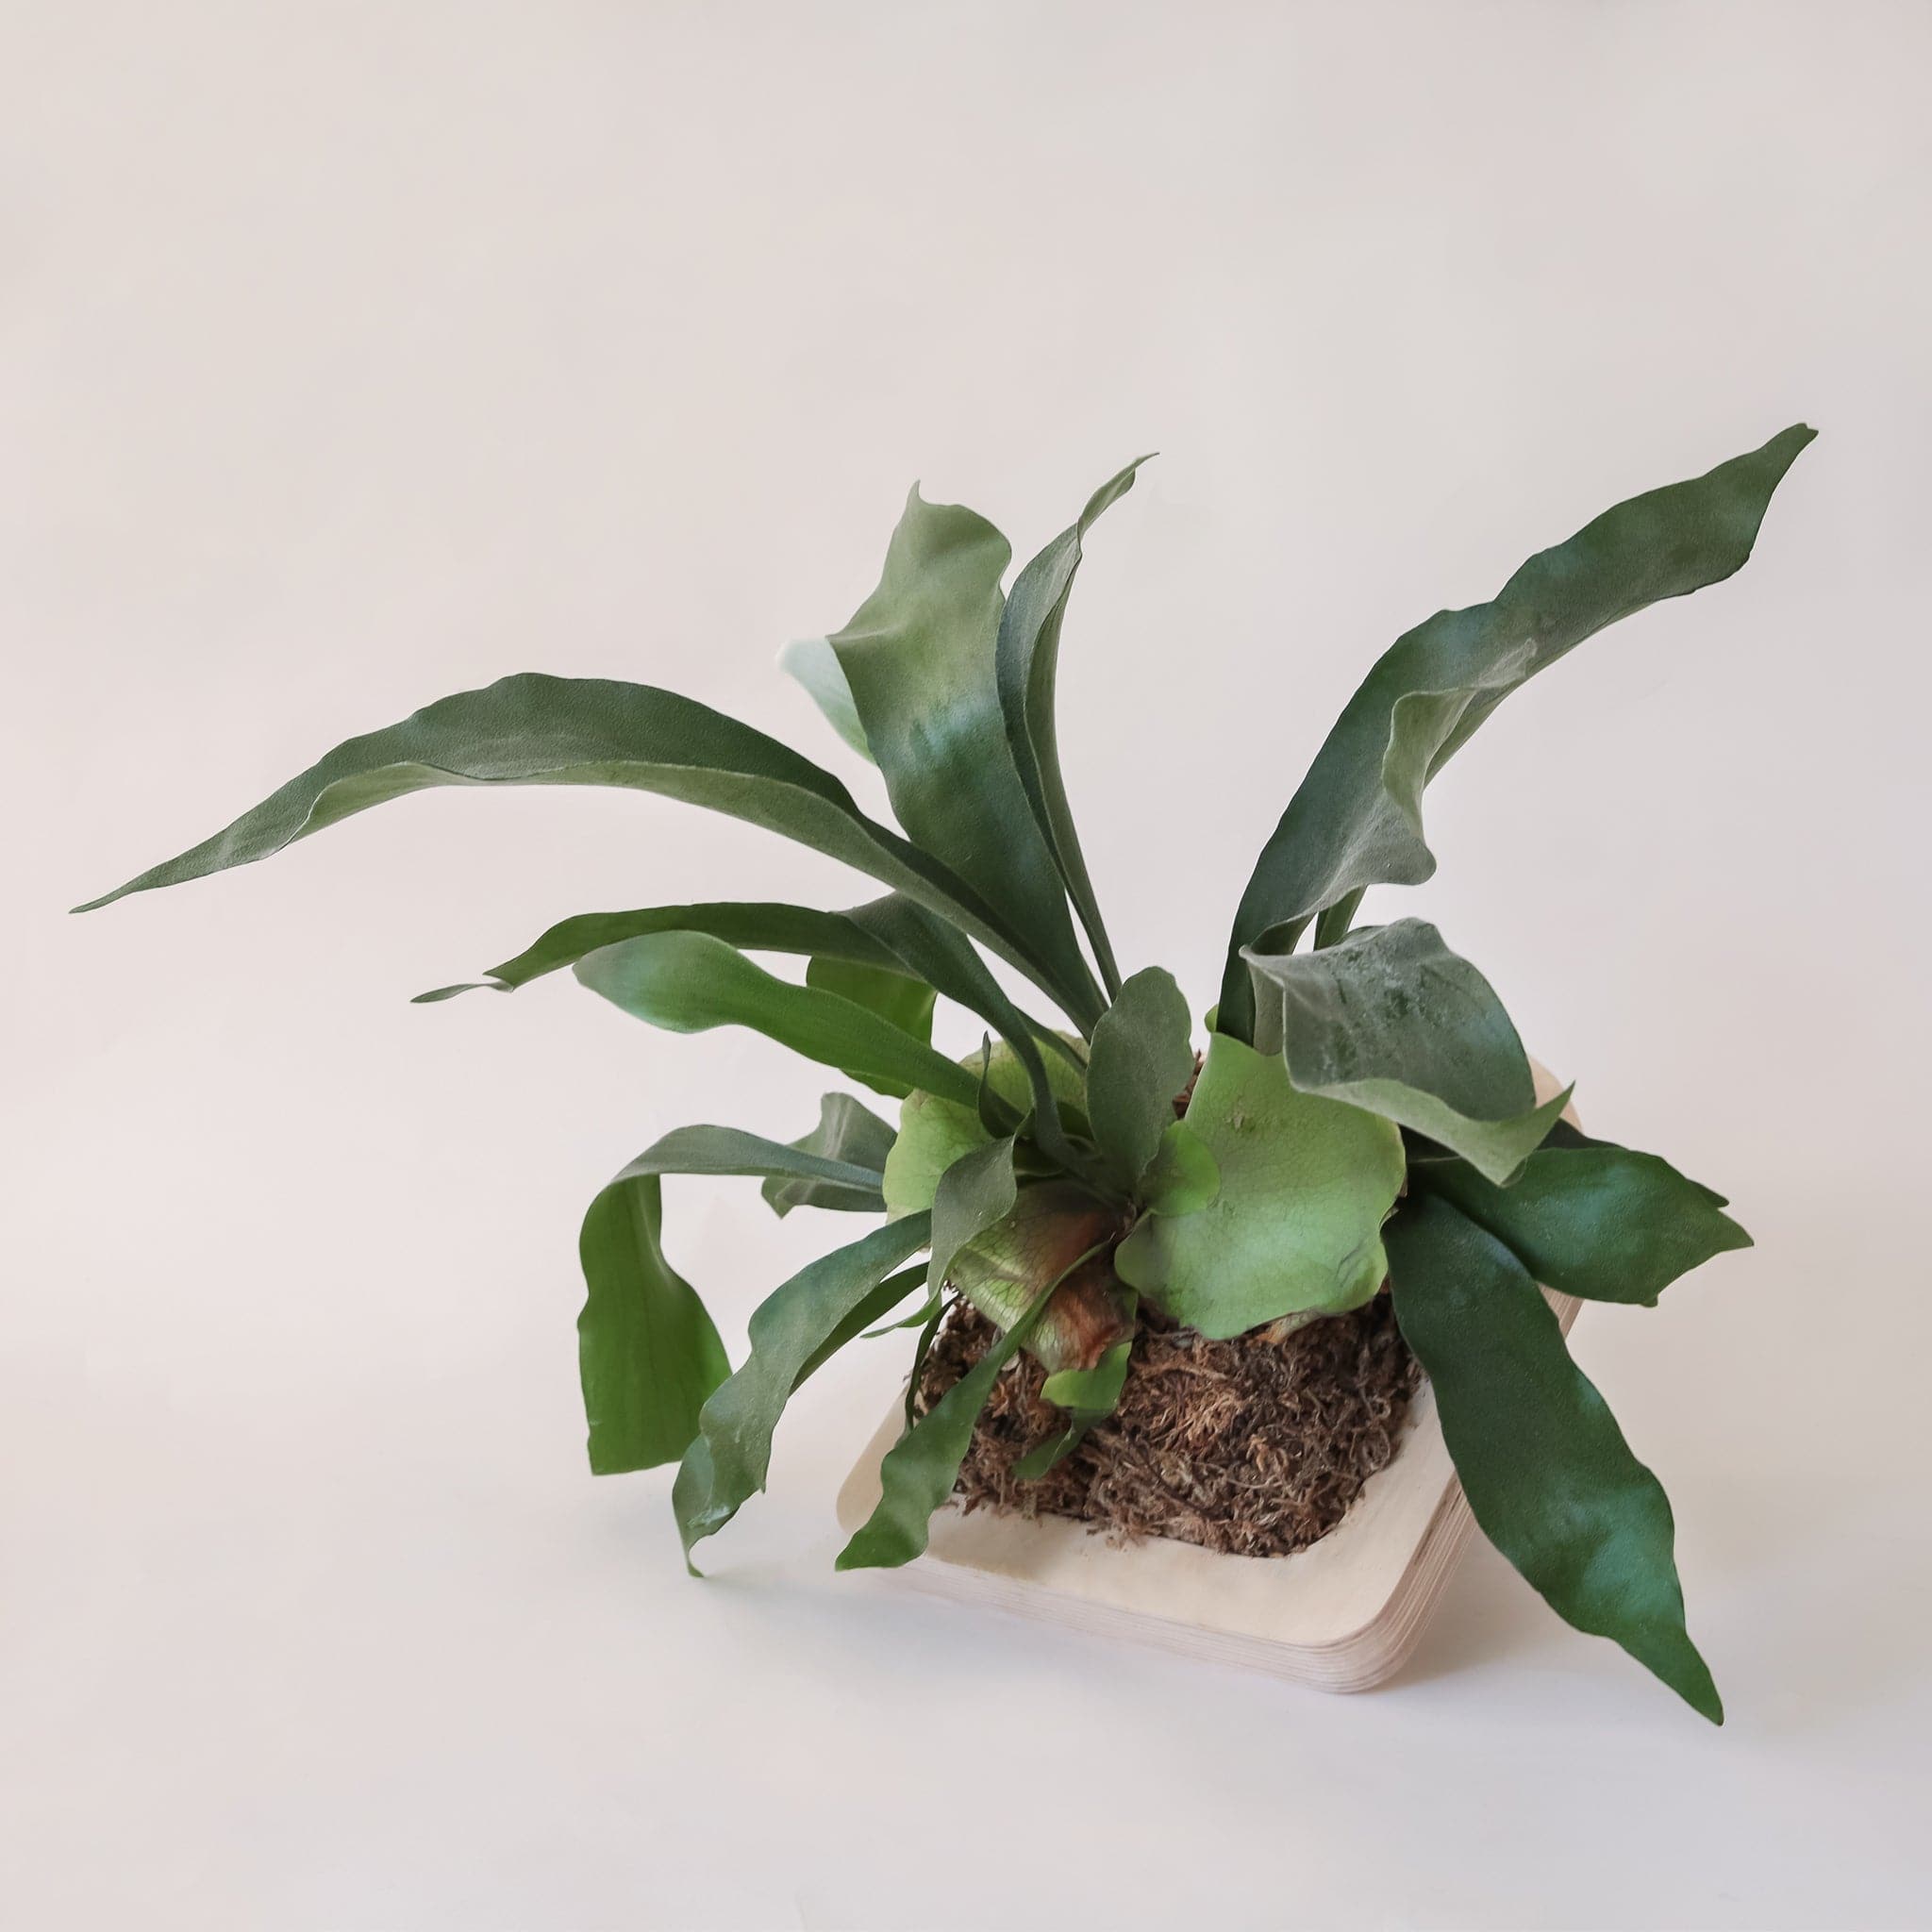 Against a white background is the top view of a mounted staghorn fern. The fern is mounted to a peach colored, arch frame. The inside of the frame is brown with long, dark green leaves. The middle leaves are sticking straight up and the side leaves drape down. 